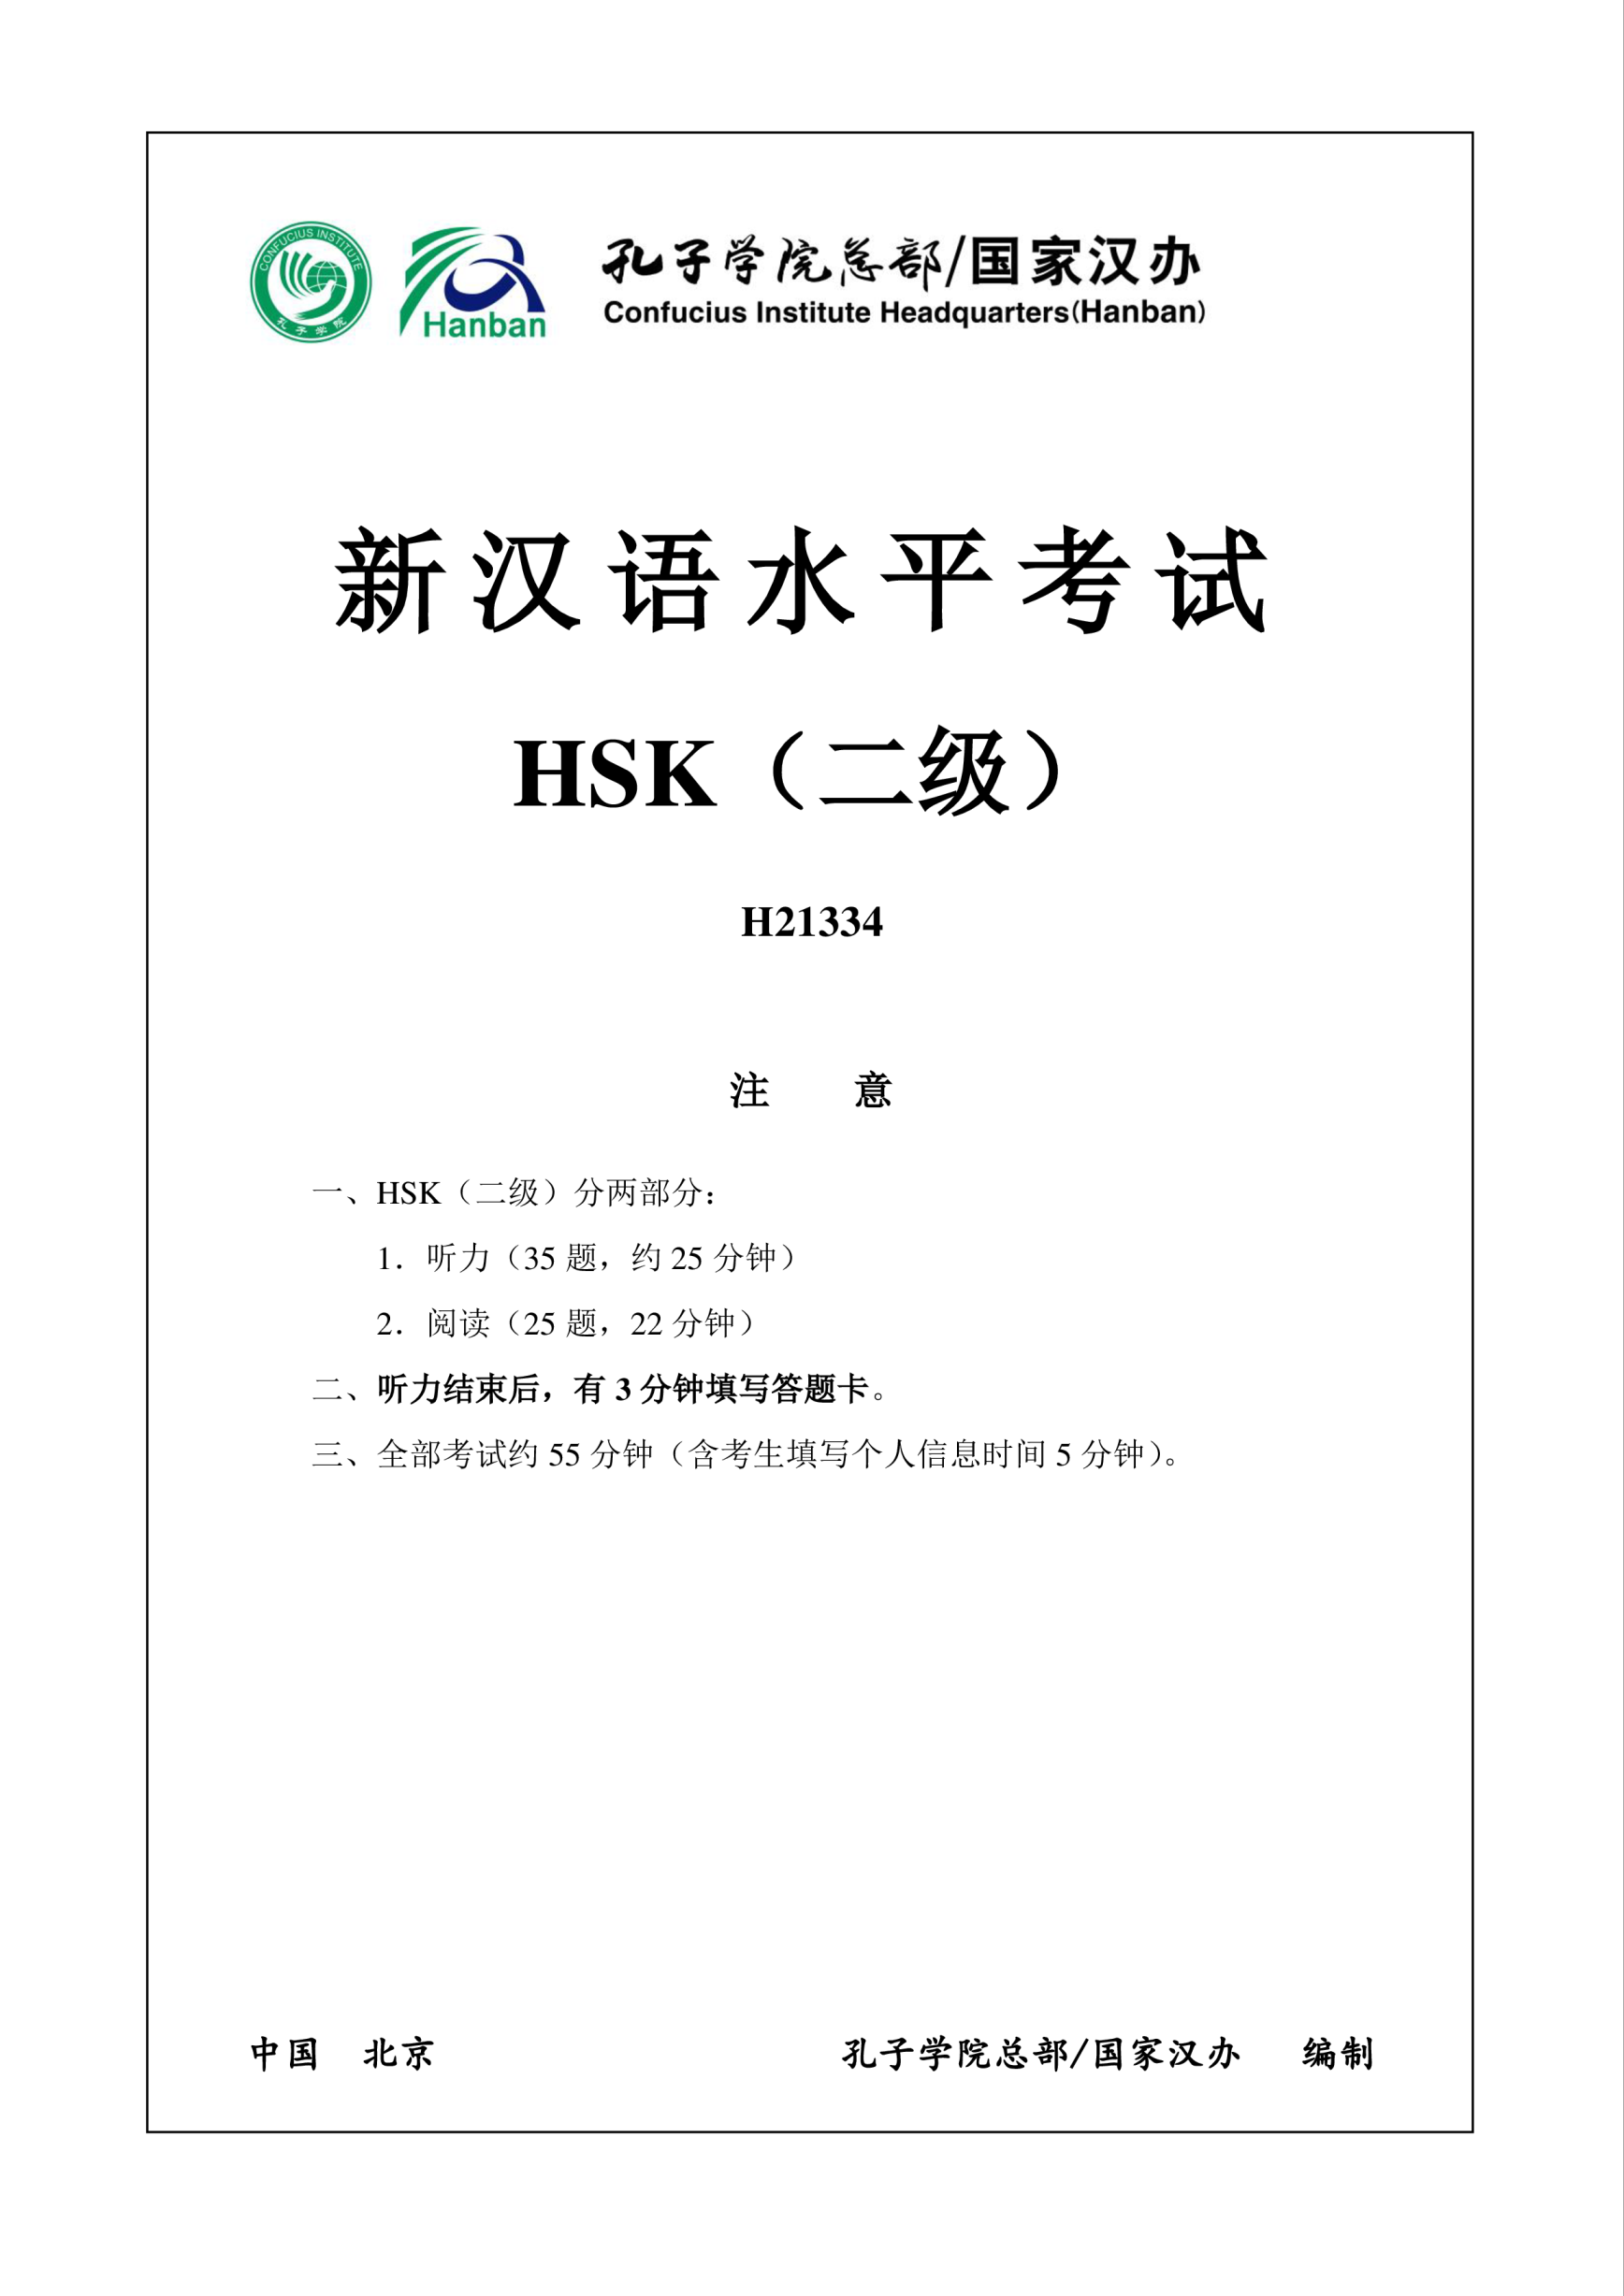 template topic preview image HSK2 Chinese Exam including Answers # HSK2 H21334